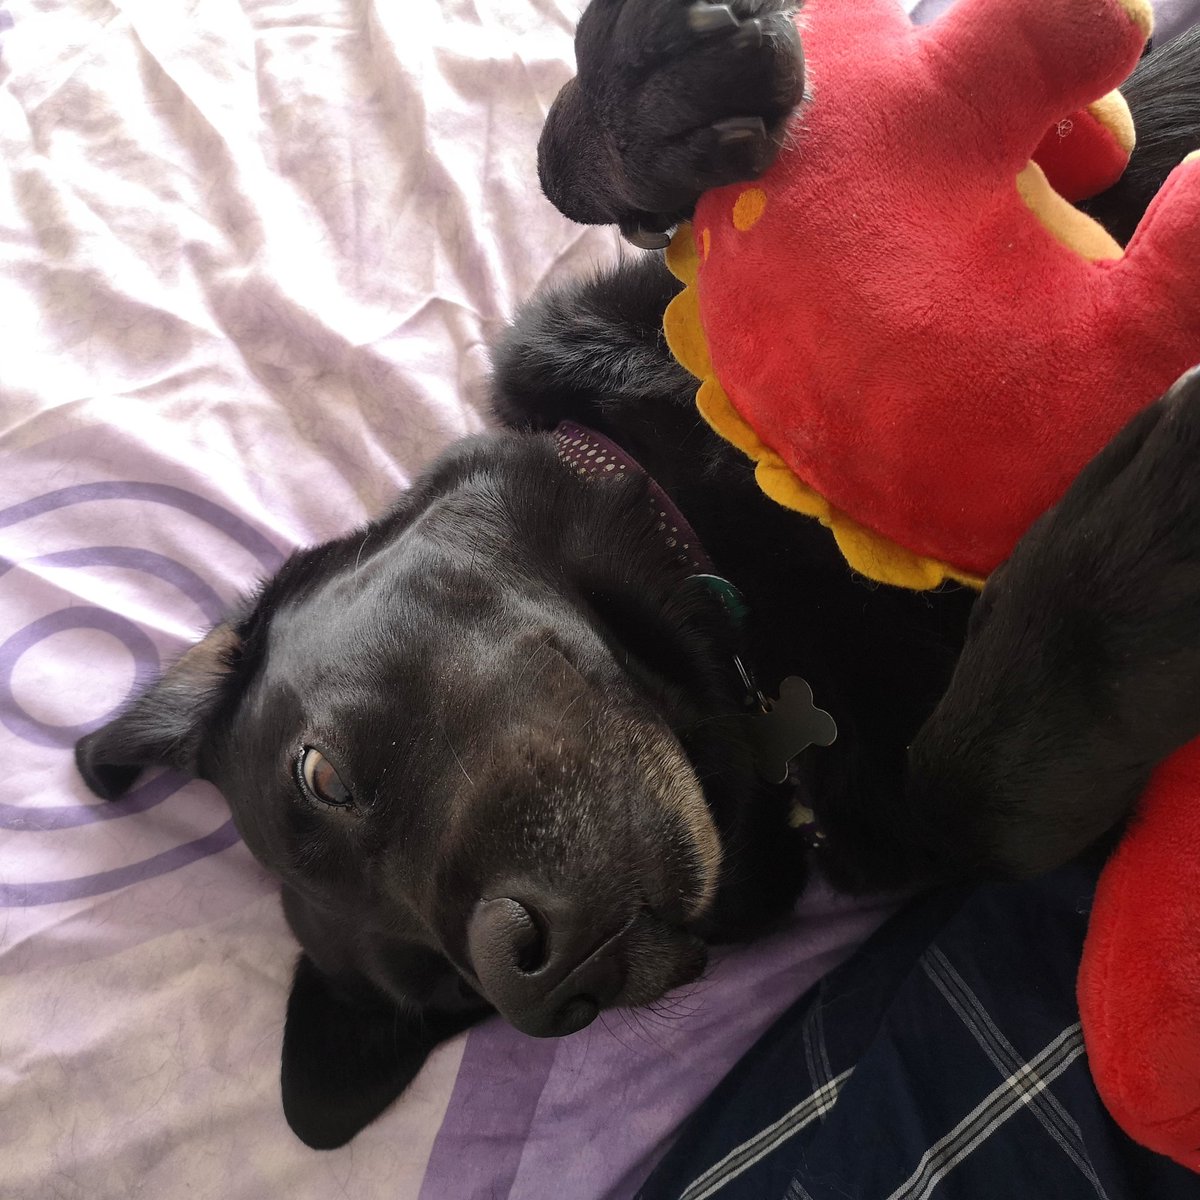 Because the world needs a daft Labrador and her toy dinosaur #Whoopi #AssistanceDog #CaninePartnersUK